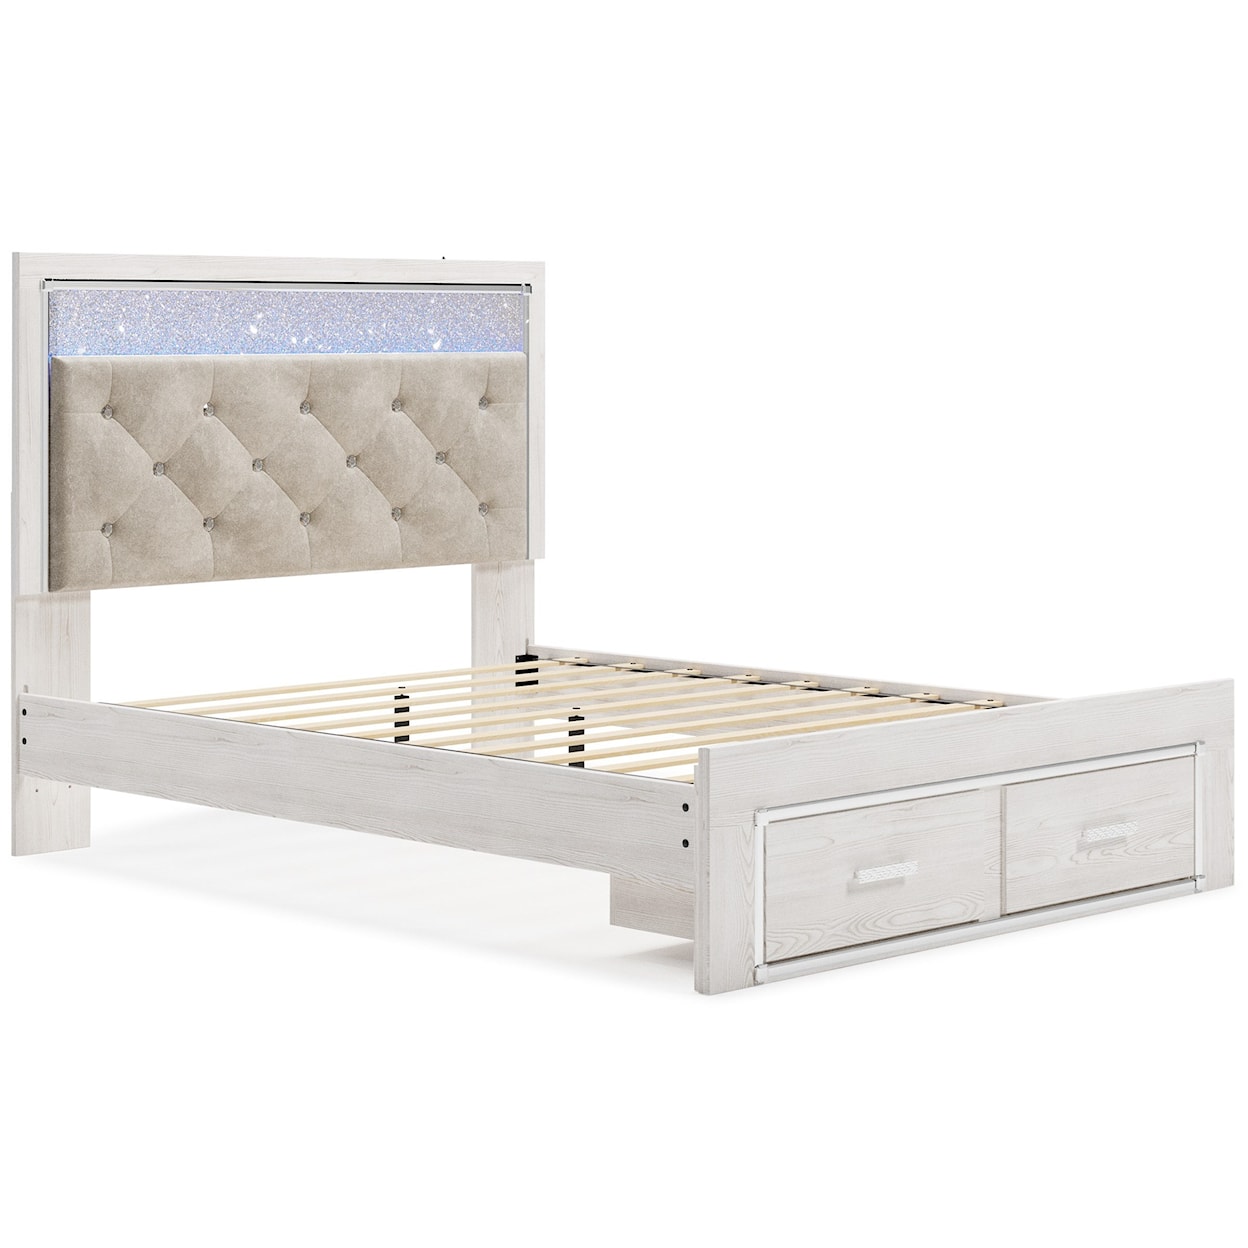 Ashley Furniture Signature Design Altyra Queen Storage Bed with Upholstered Headboard